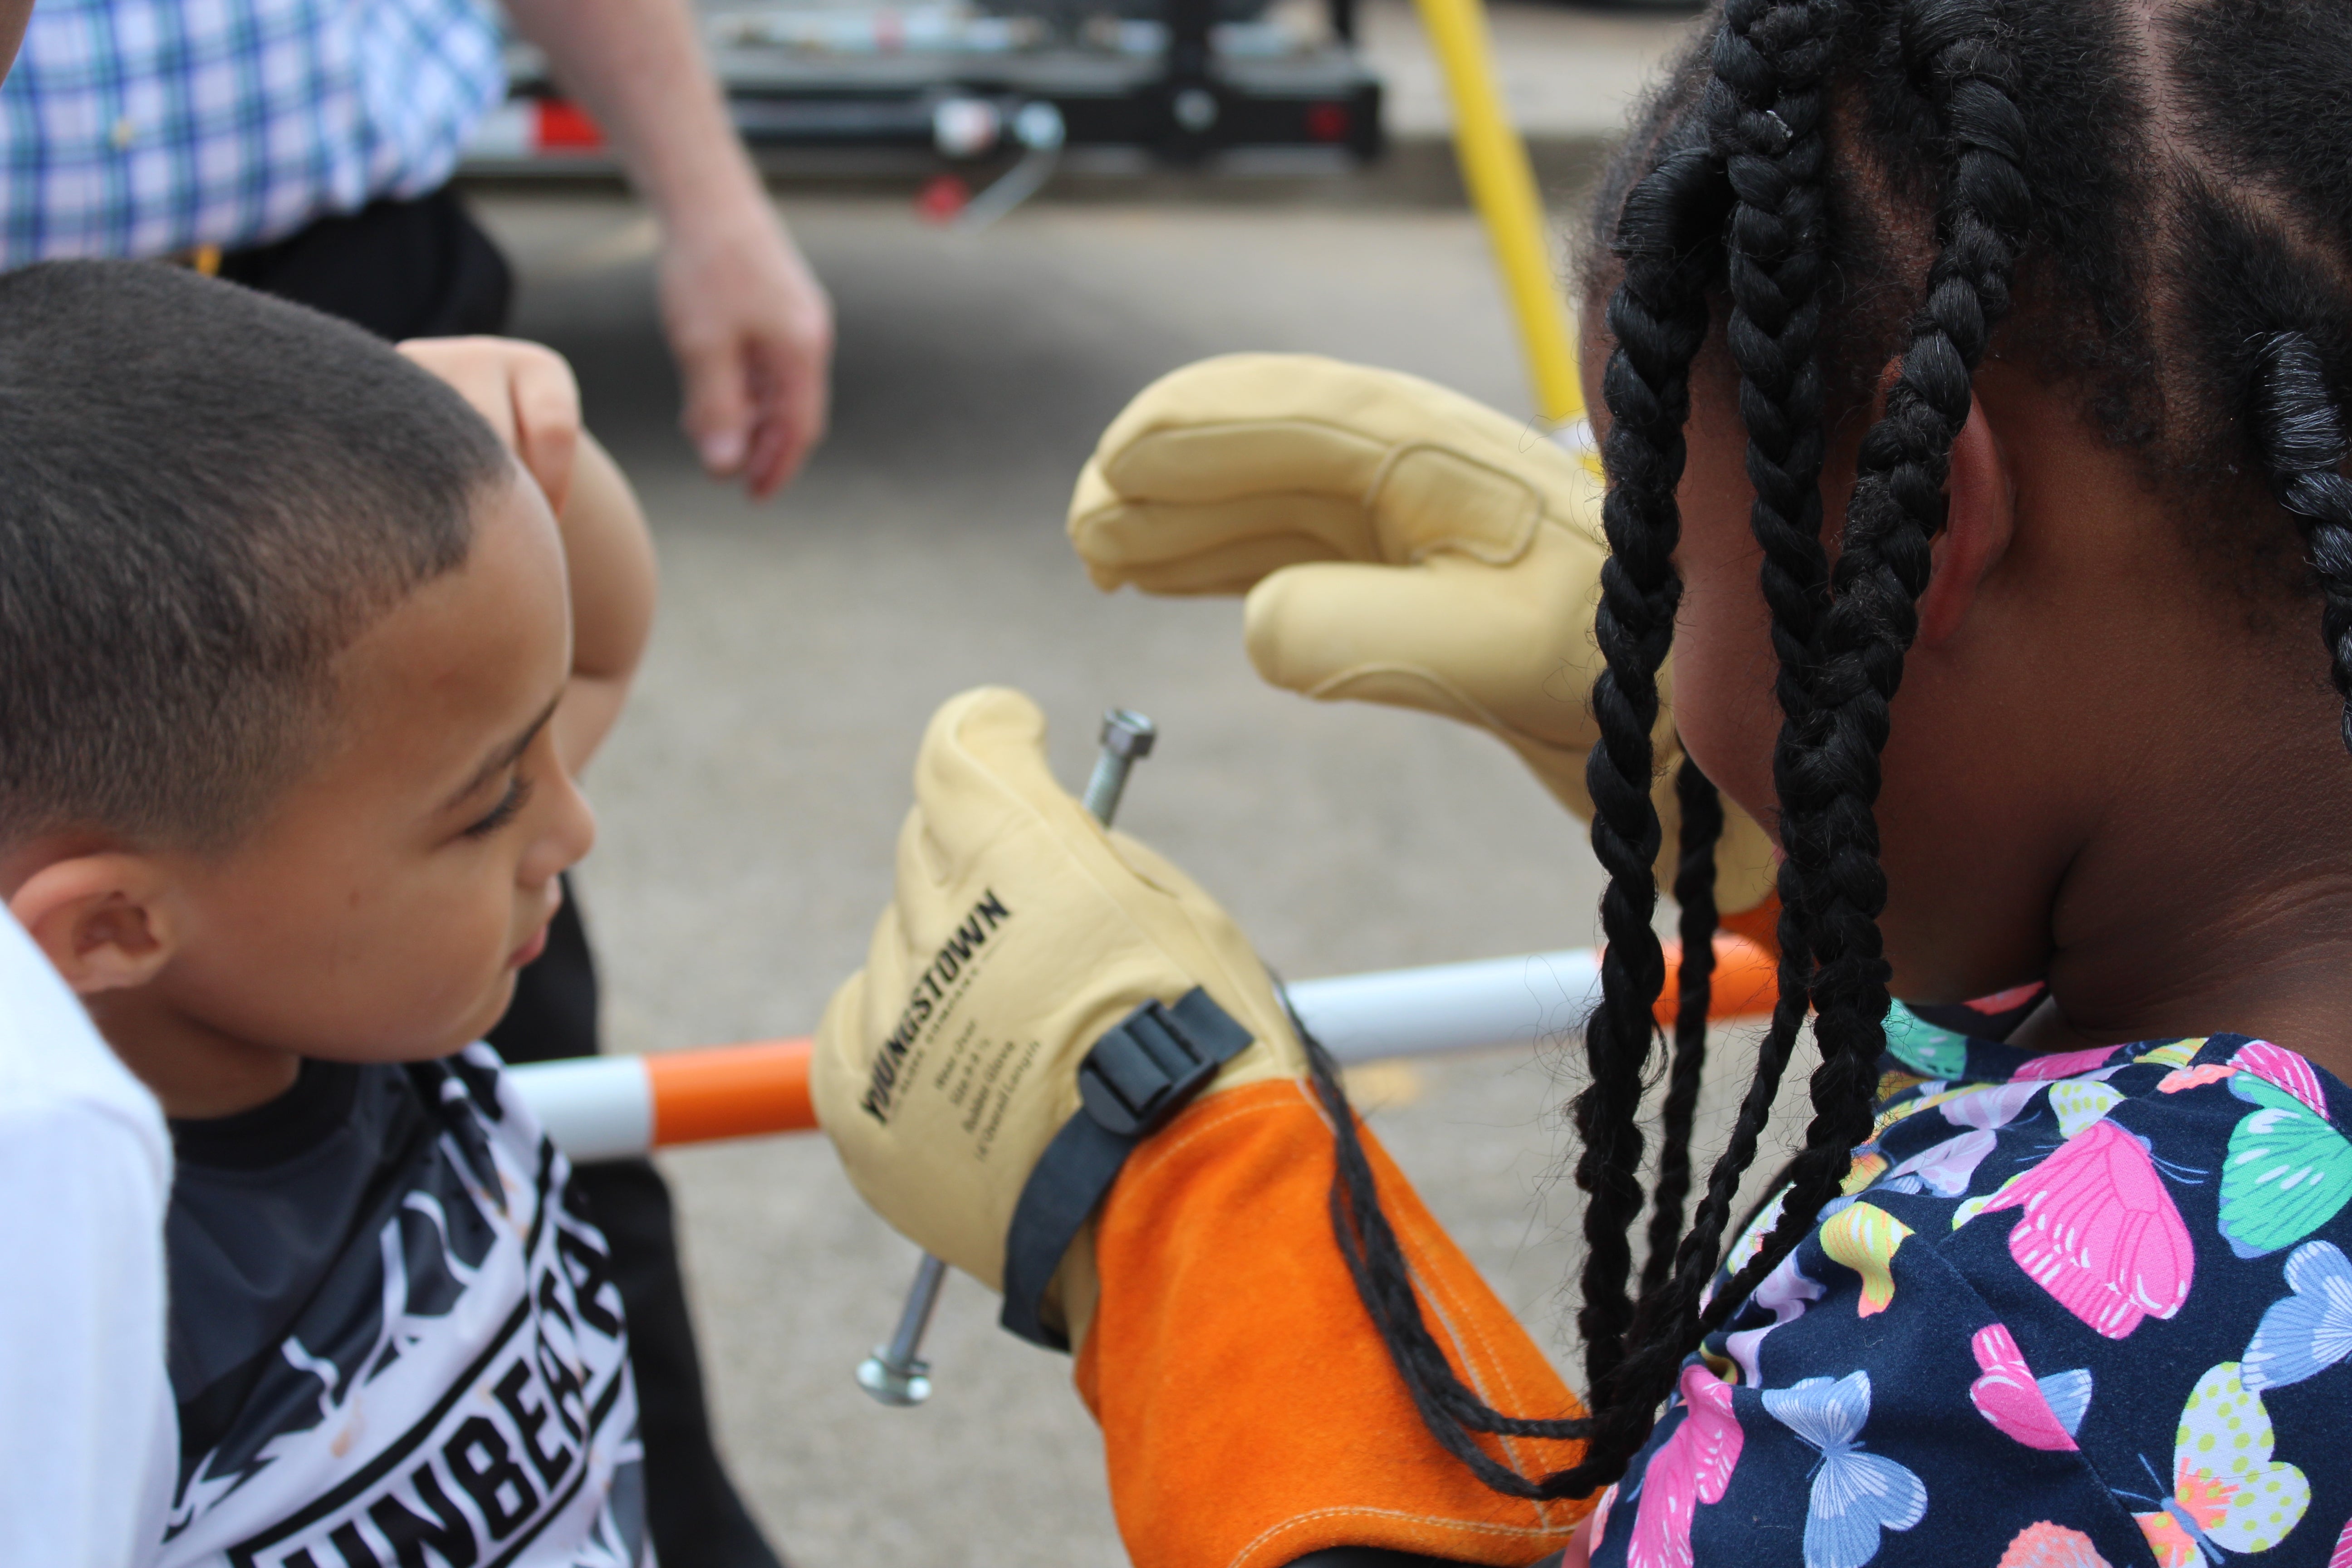 A young boy watches as a young girl attempts to put a nut on a bolt while wearing linemen gloves.